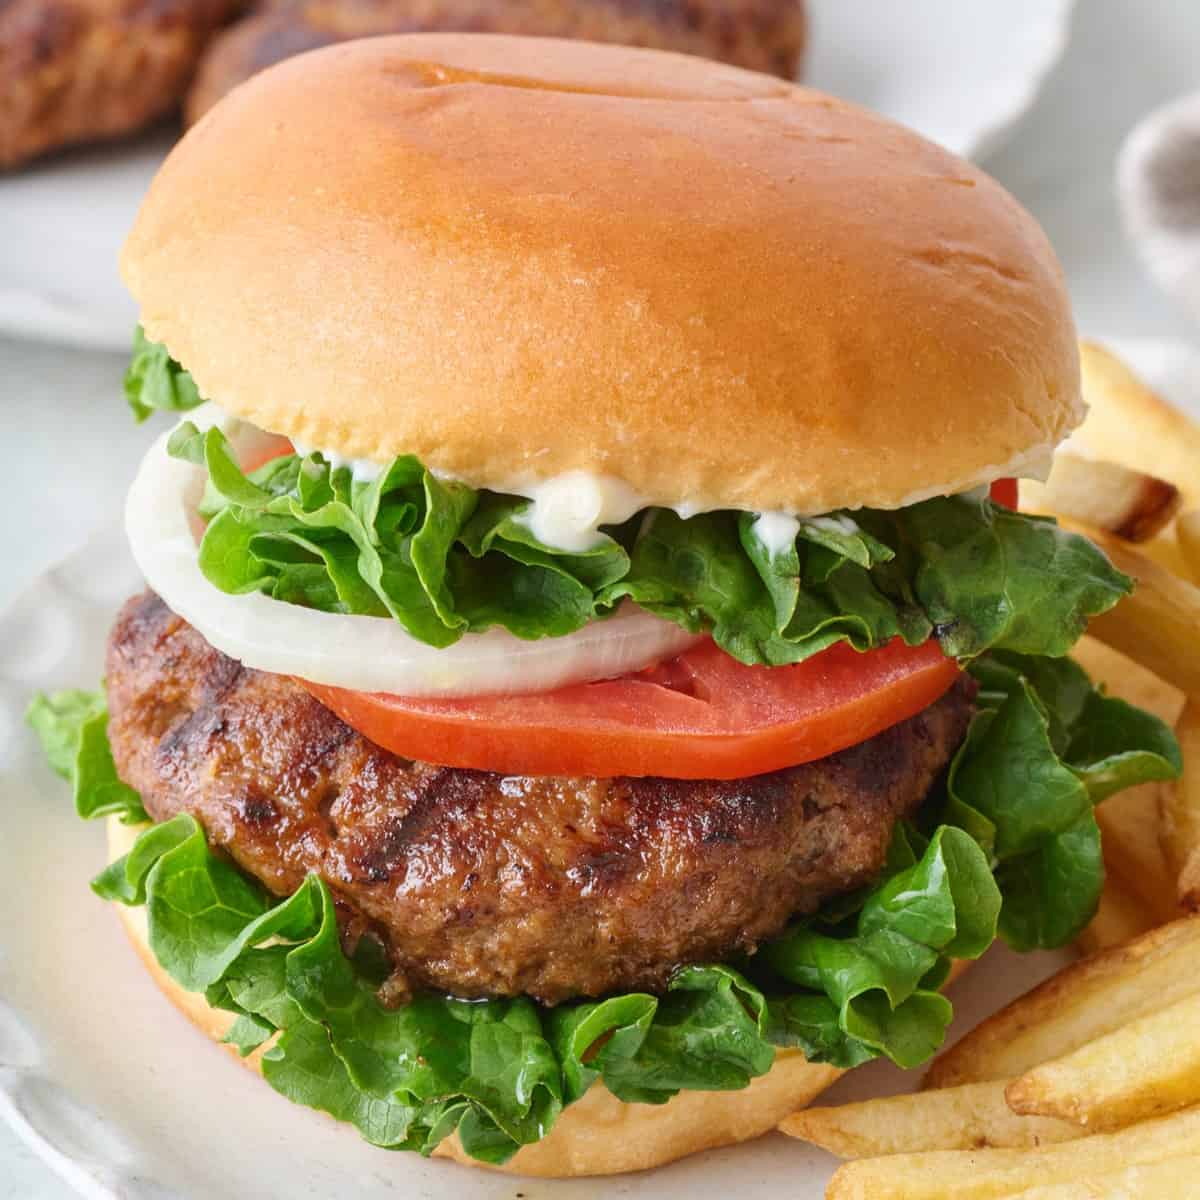 Is a plain burger (just buns and meat) healthier than one with